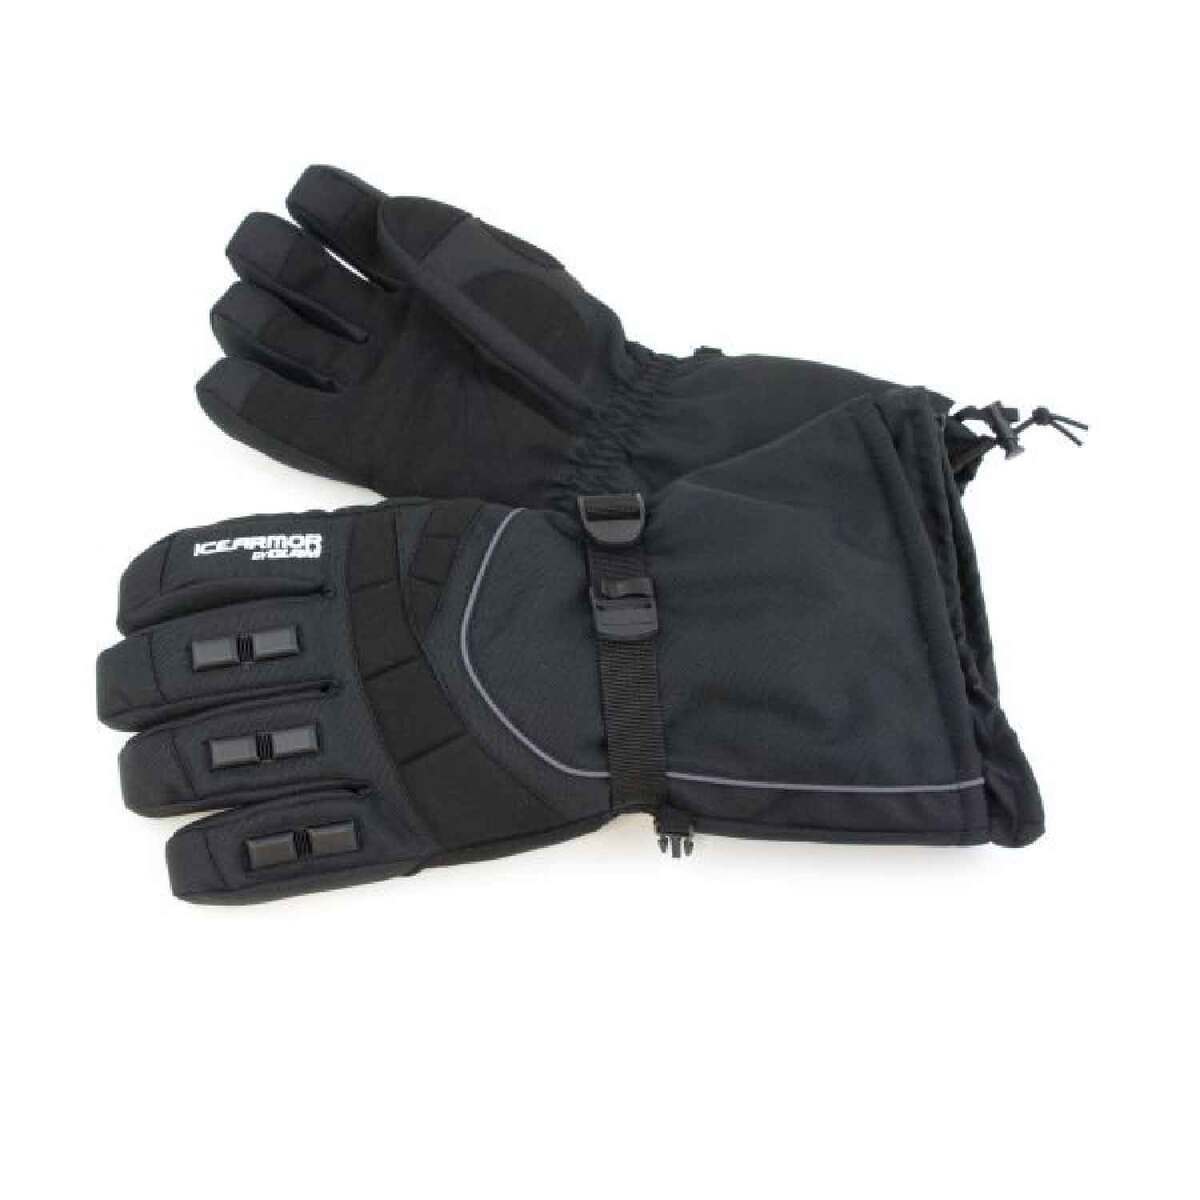 Clam Extreme Men's Ice Fishing Glove Sportsman's Warehouse, 46% OFF